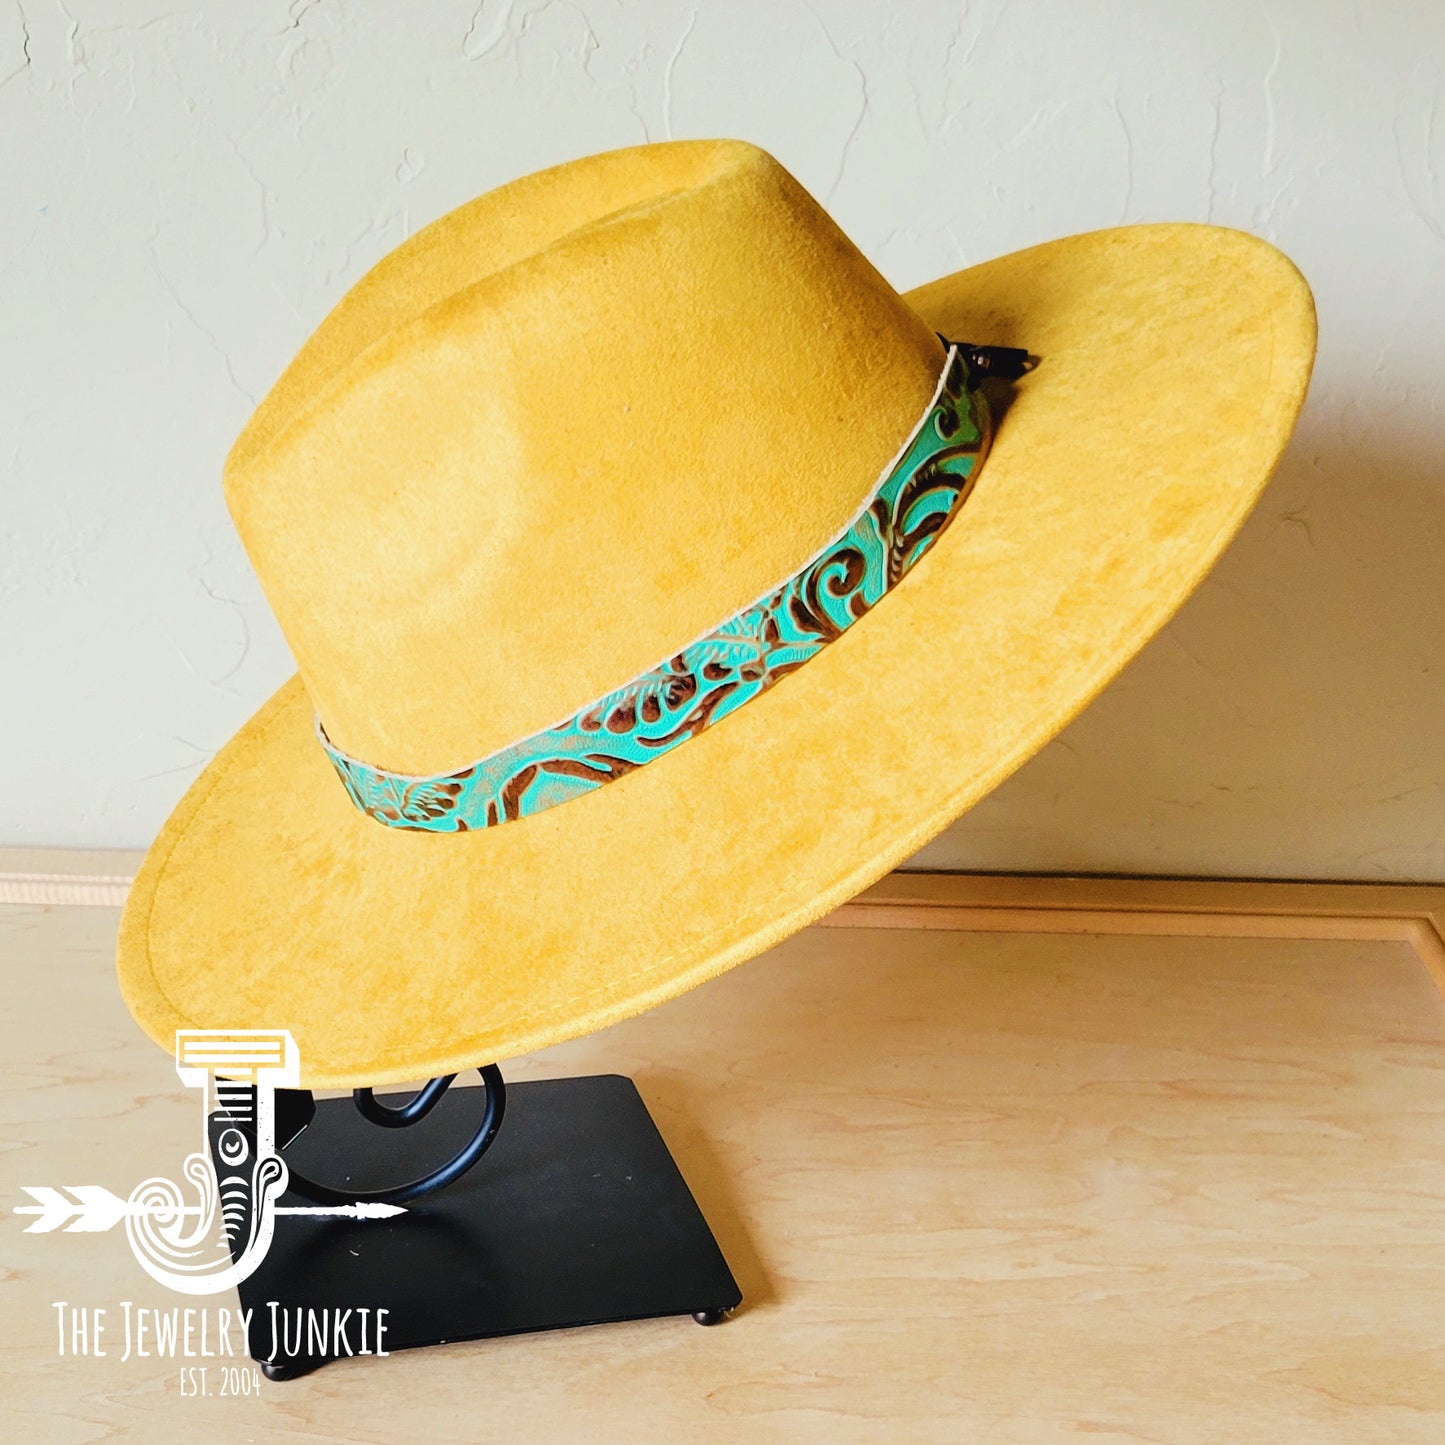 Mustard Boho Western Hat w/ Choice of Leather Hat Band 983x